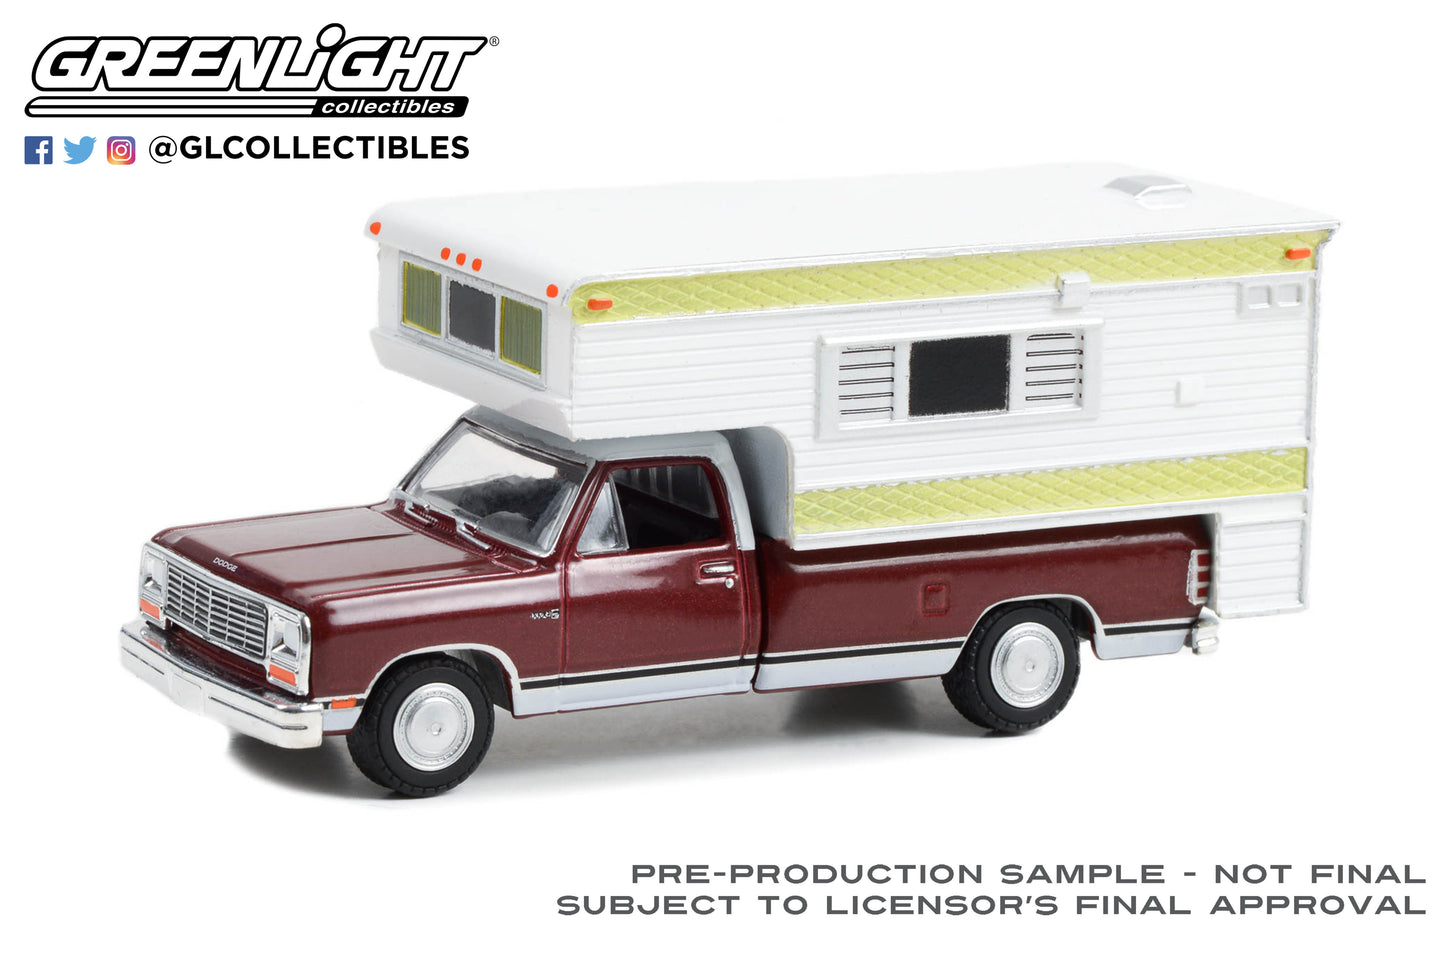 GreenLight 1:64 1981 Dodge Ram D-250 Royal with Large Camper - Medium Crimson Red and Pearl White 30409